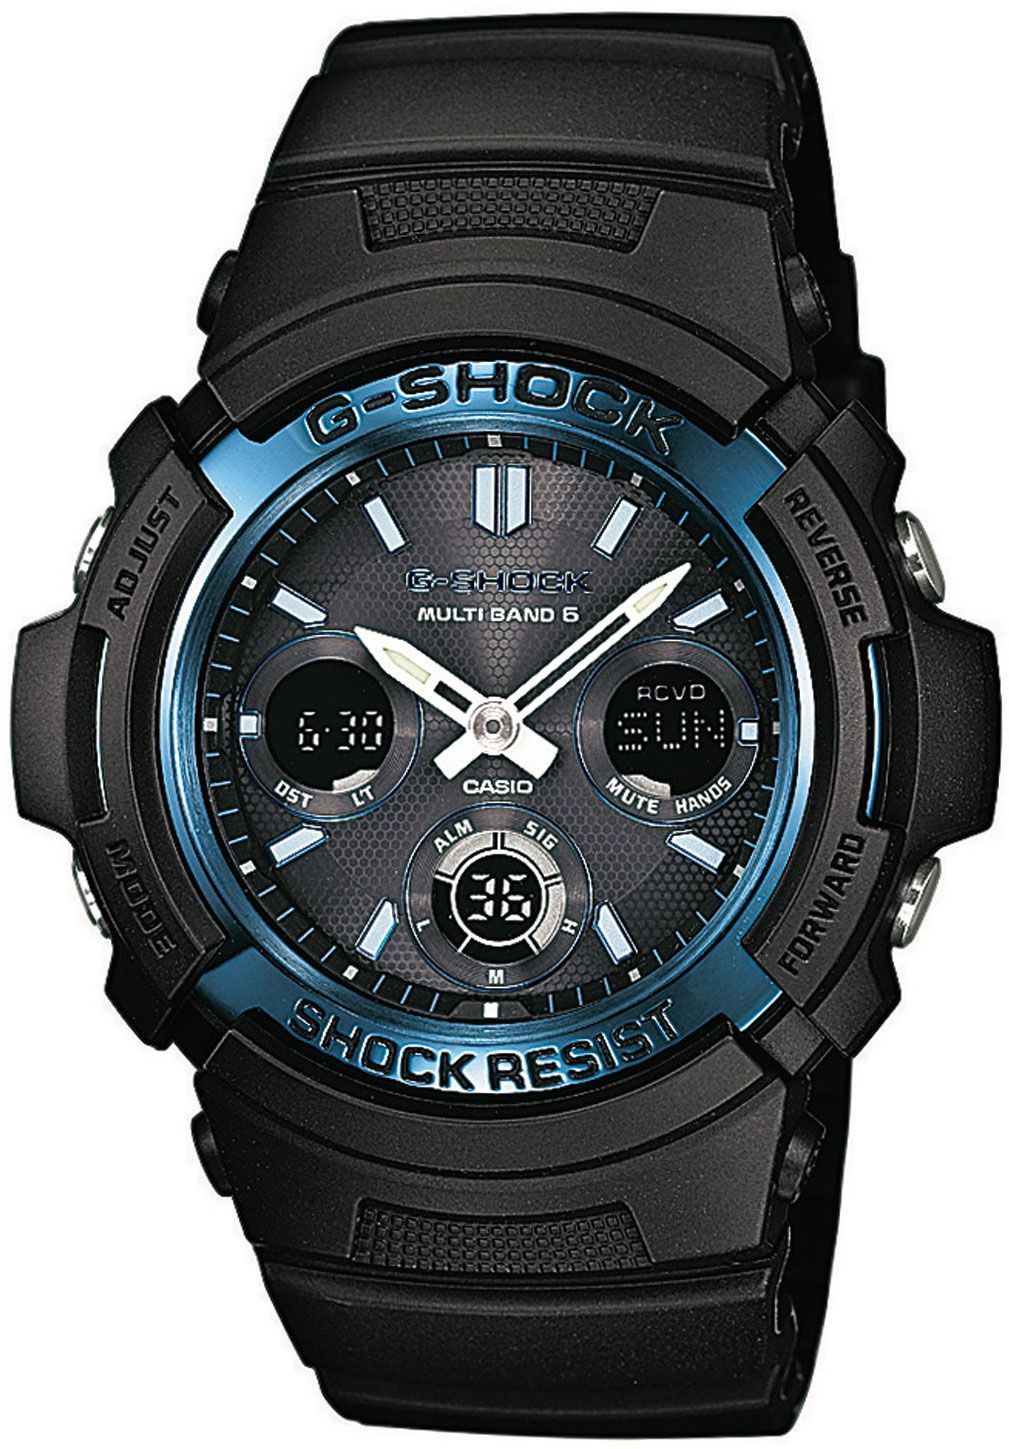 This Casio G-shock Analogue-Digital Watch for Men is the perfect timepiece to wear or to gift. It's Black 46 mm Round case combined with the comfortable Black Plastic watch band will ensure you enjoy this stunning timepiece without any compromise. Operated by a high quality Quartz movement and water resistant to 20 bars, your watch will keep ticking. This sporty and trendy watch is a perfect gift for New Year, birthday,valentine's day and so on - The watch has a calendar function: Day-Date, Worldtime, Stop Watch, Countdown, Alarm, Light High quality 21 cm length and 21 mm width Black Plastic strap with a Fold over with Buckle Case diameter: 46 mm, case thickness: 15 mm, case colour: Black and dial colour: Blue